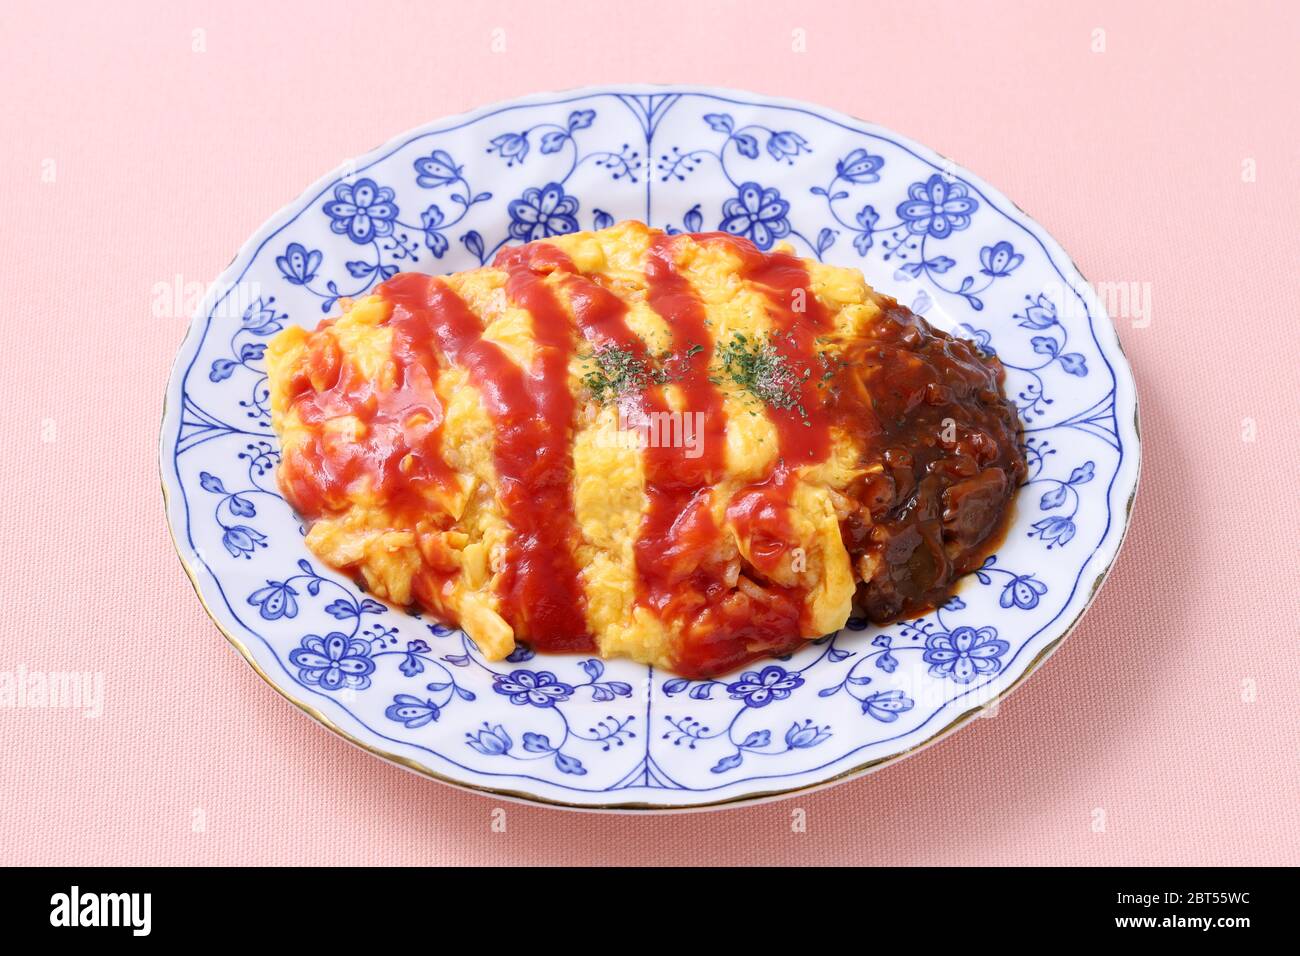 Japanese food, Omuraise with ketchup in a plate on table Stock Photo